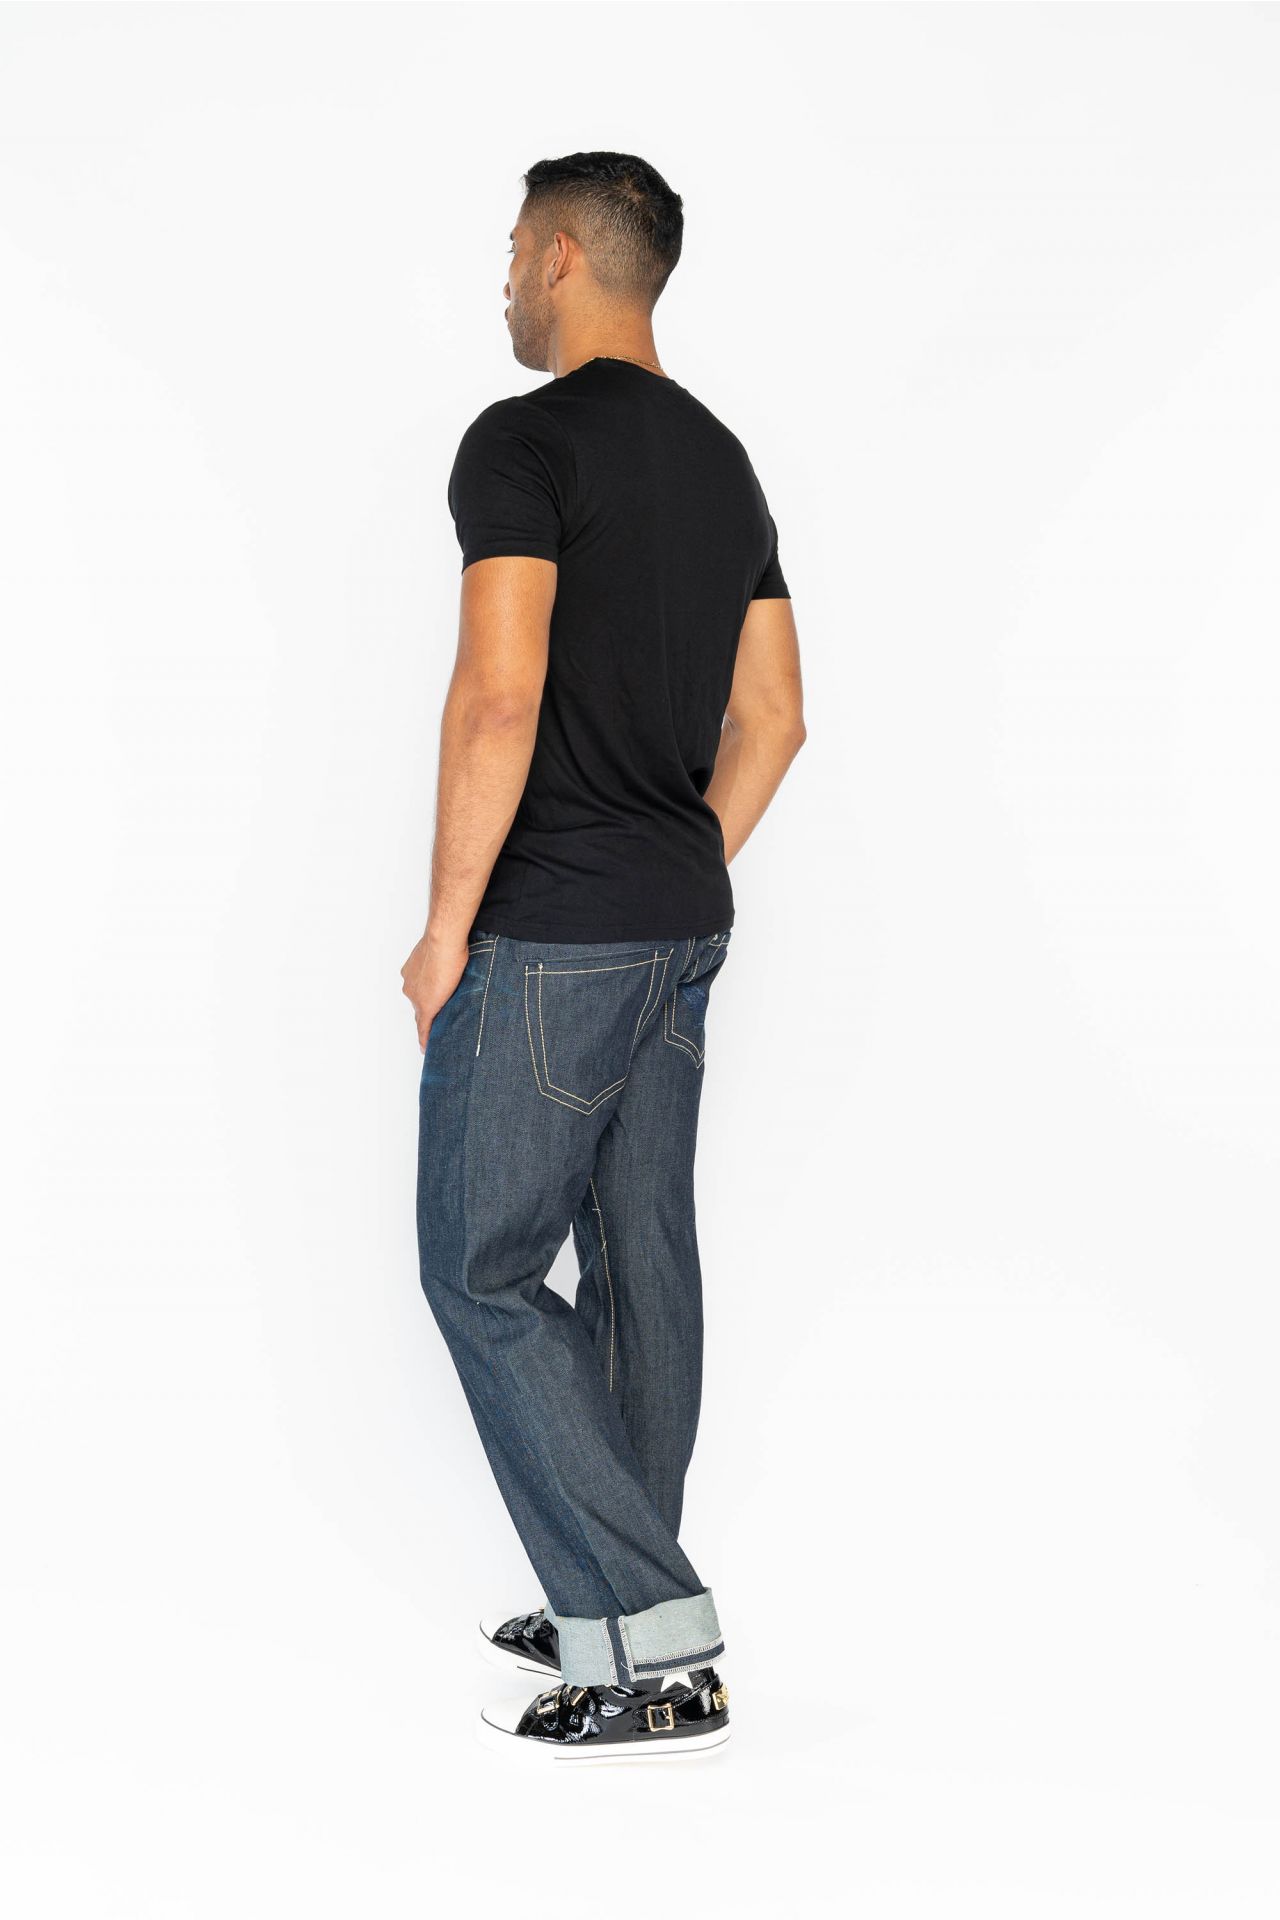 RAW DENIM COLLECTION MENS BOOTCUT SANDED JEANS WITH EMBROIDERY AND HEAVY CONTRAST STITCHING